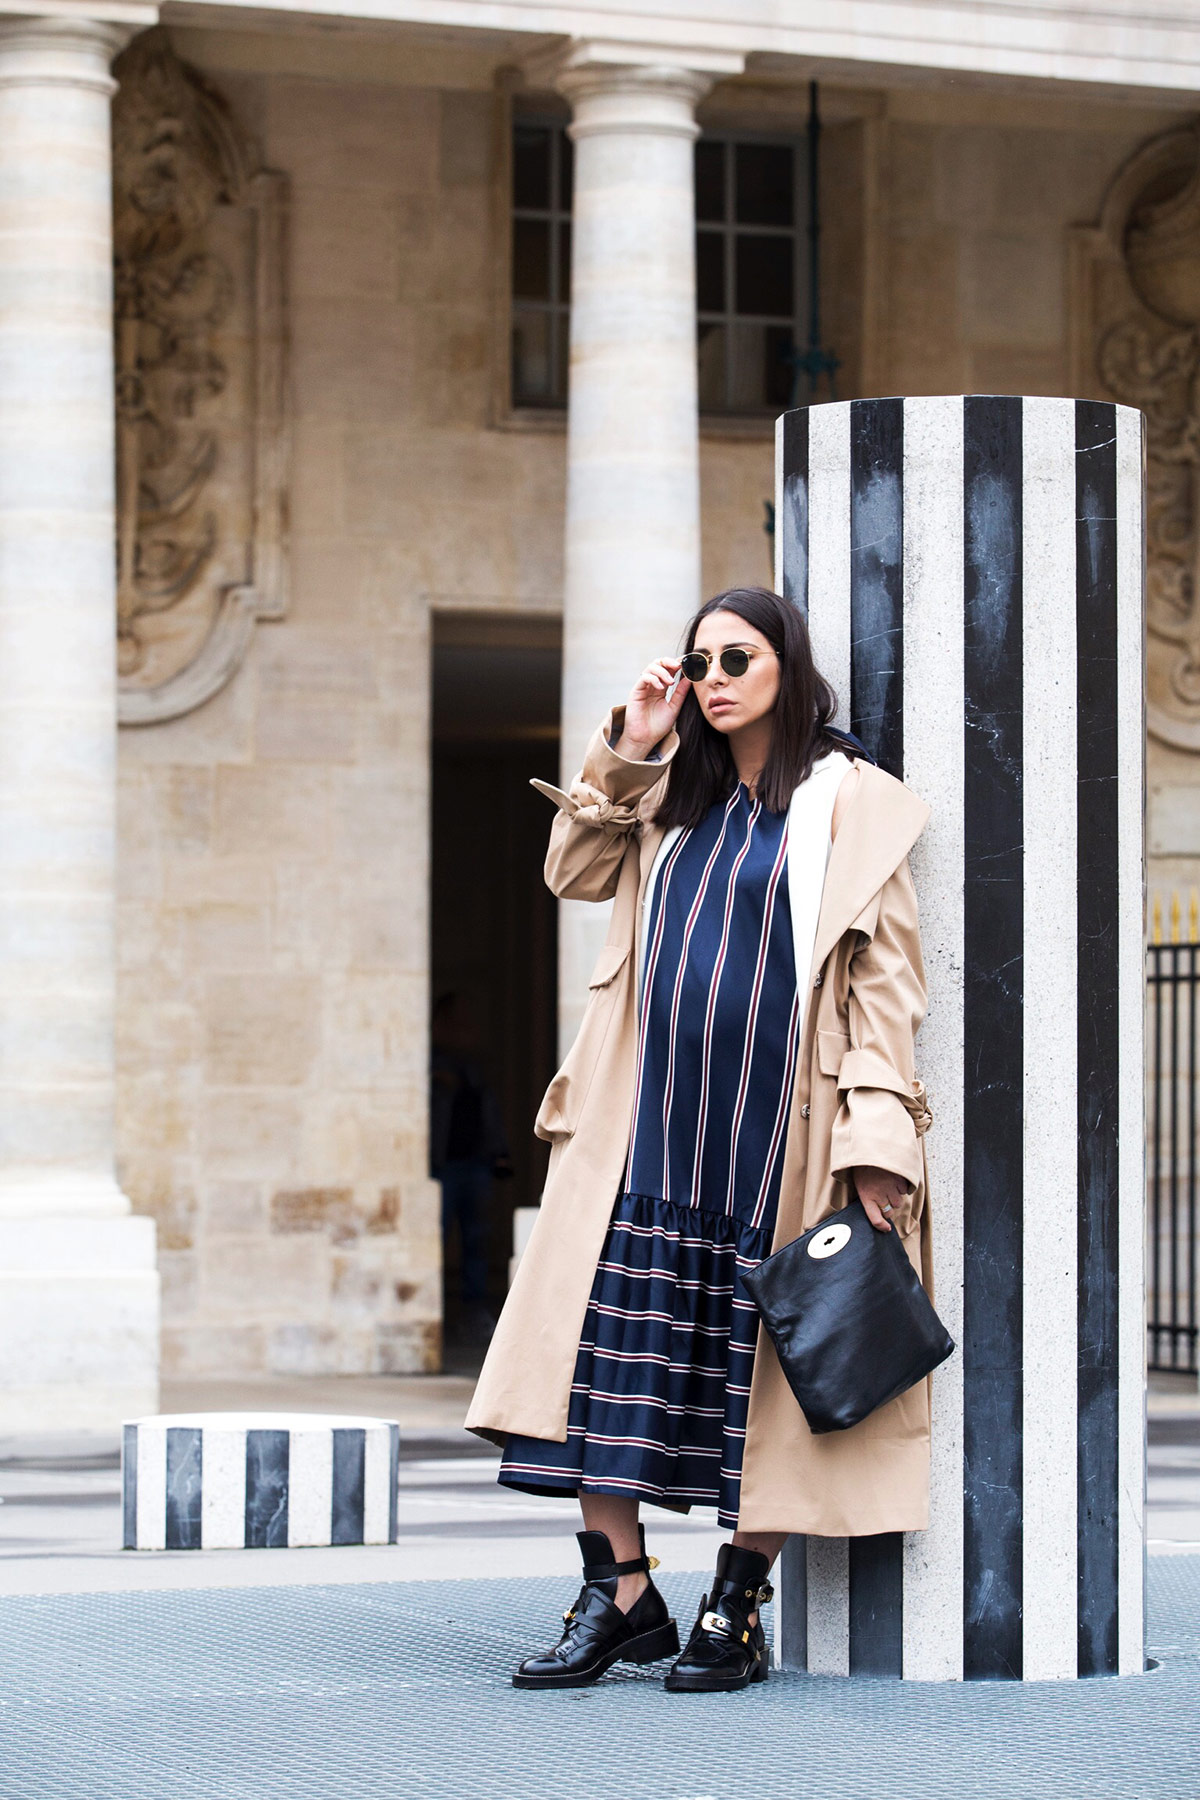 Stripes on stripes, trench coat and Balenciaga combat boots by Stella Asteria Fashion & Lifestyle Blogger during Paris Fashion Week - Paris Streetstyle and Pregnancy style inspiration - how to dress the bump in style